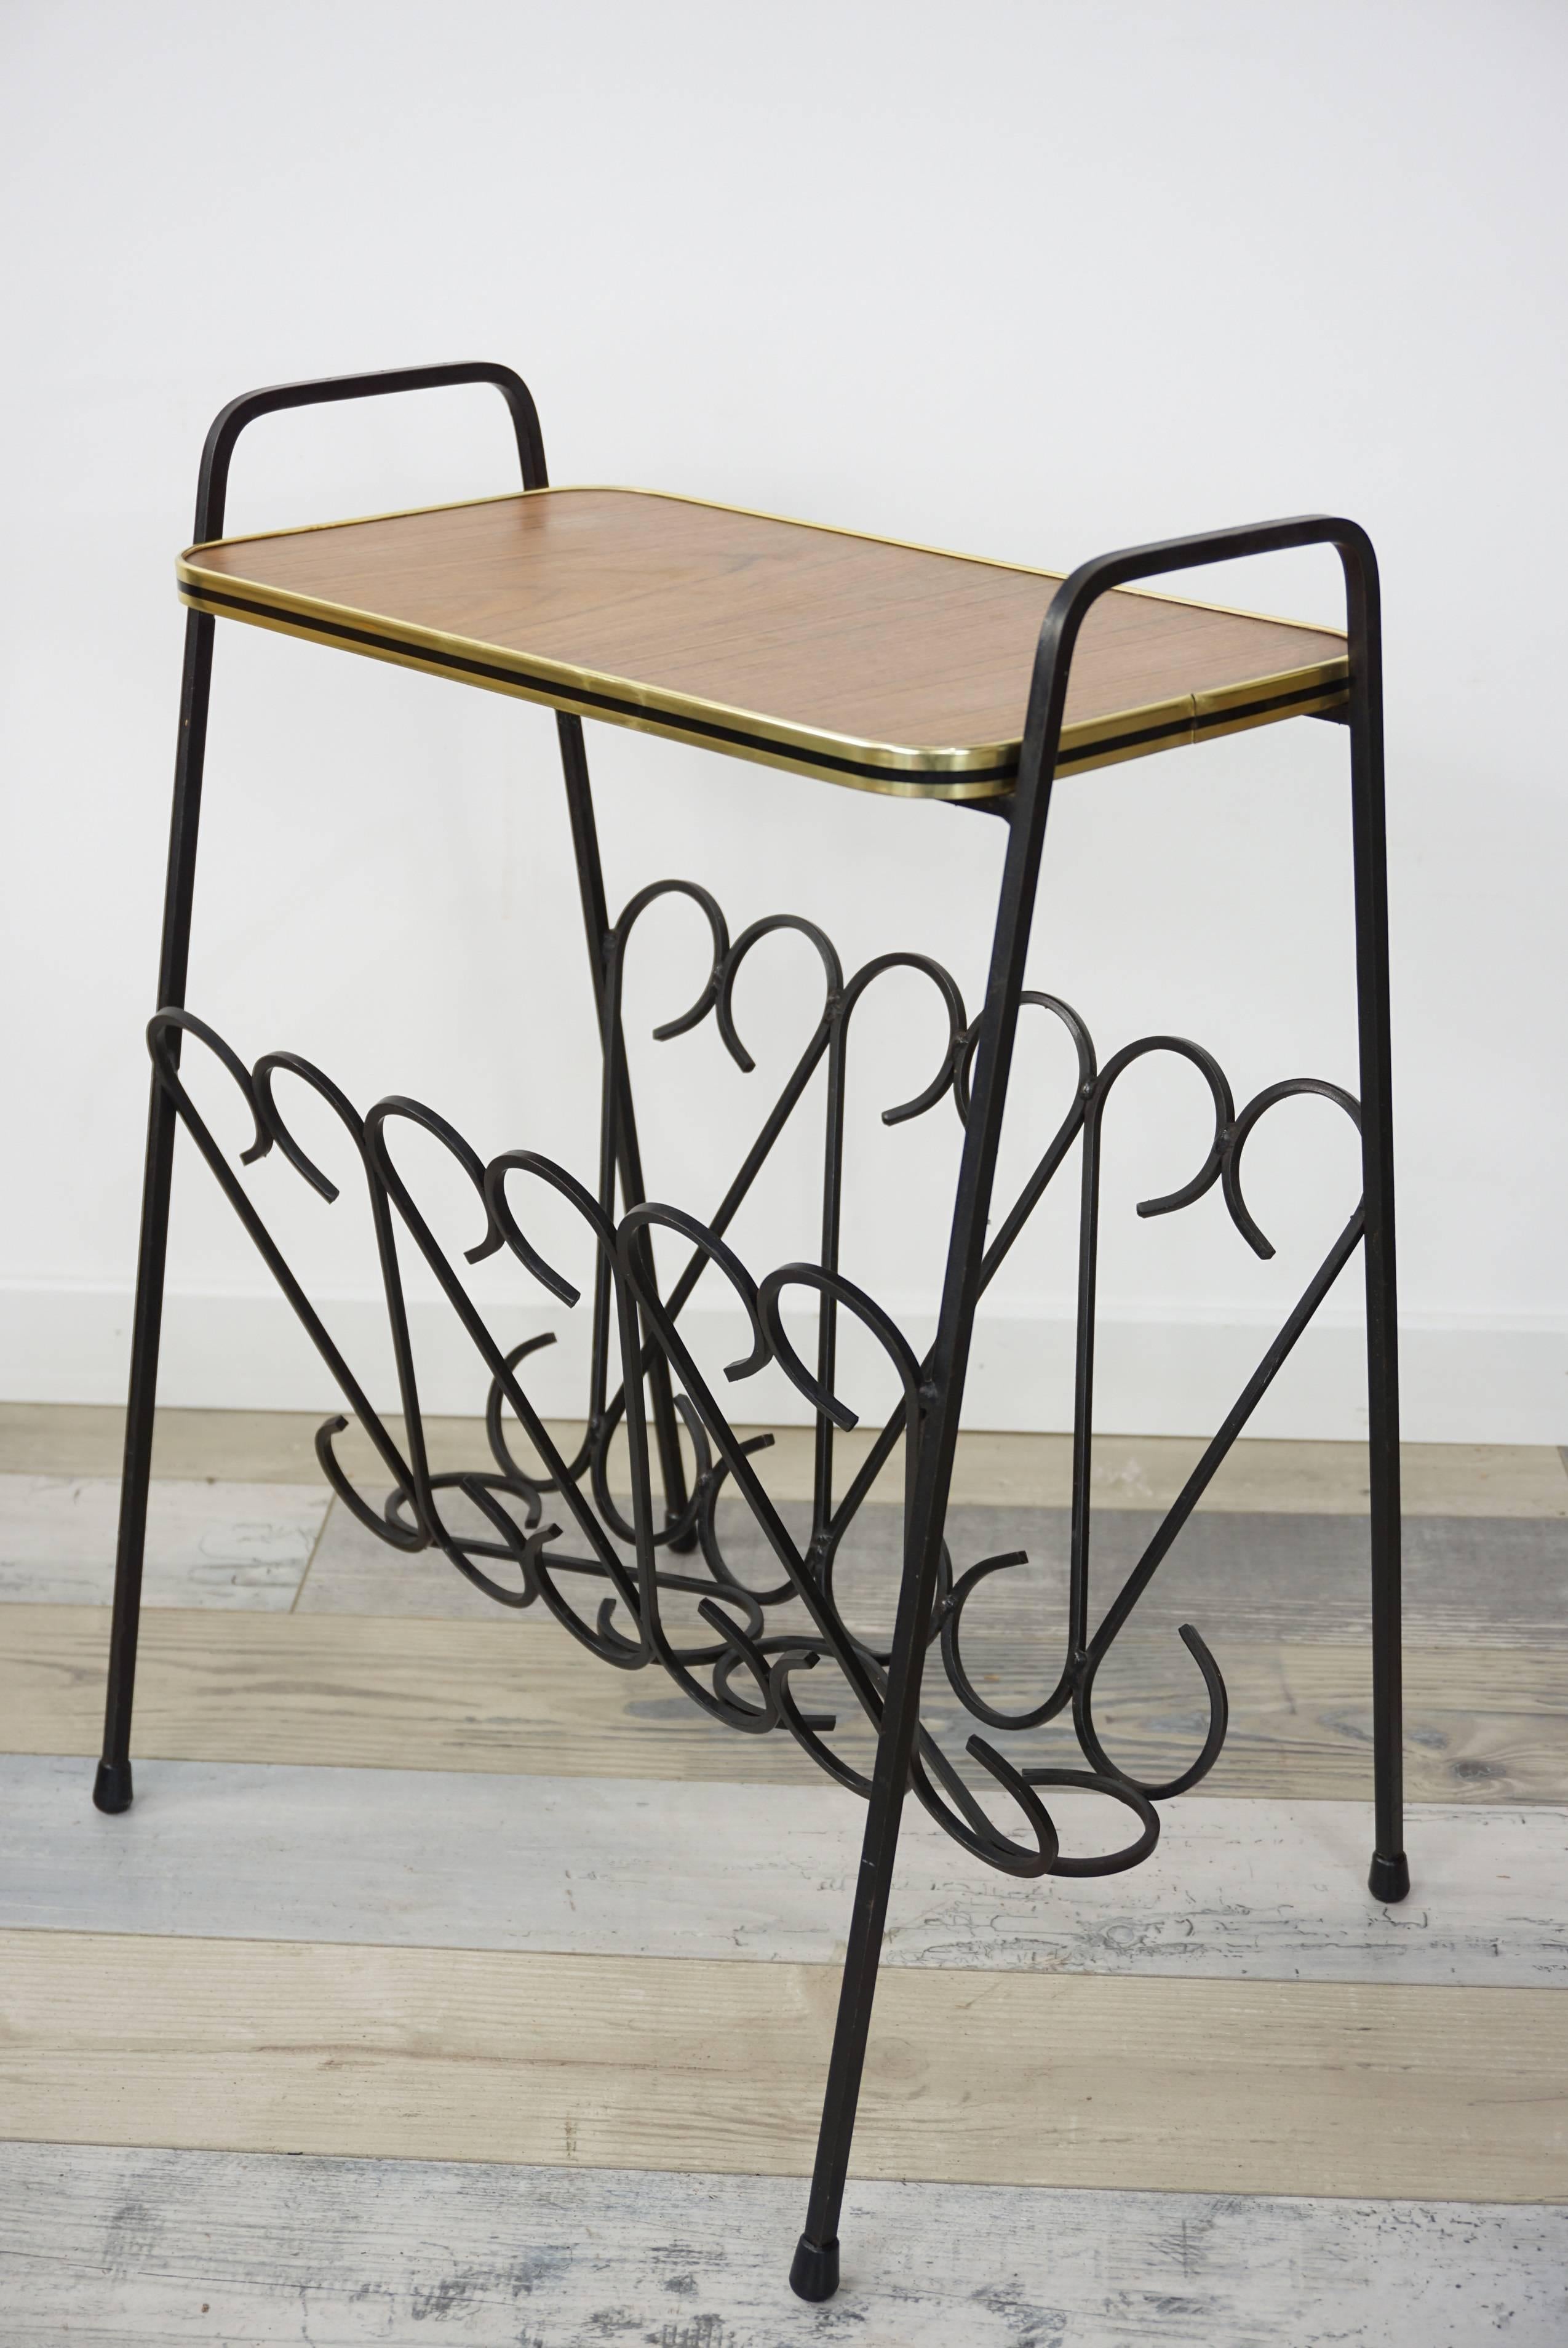 1950s design side table composed of a wrought iron structure forming a magazine rack and a wooden shelf.